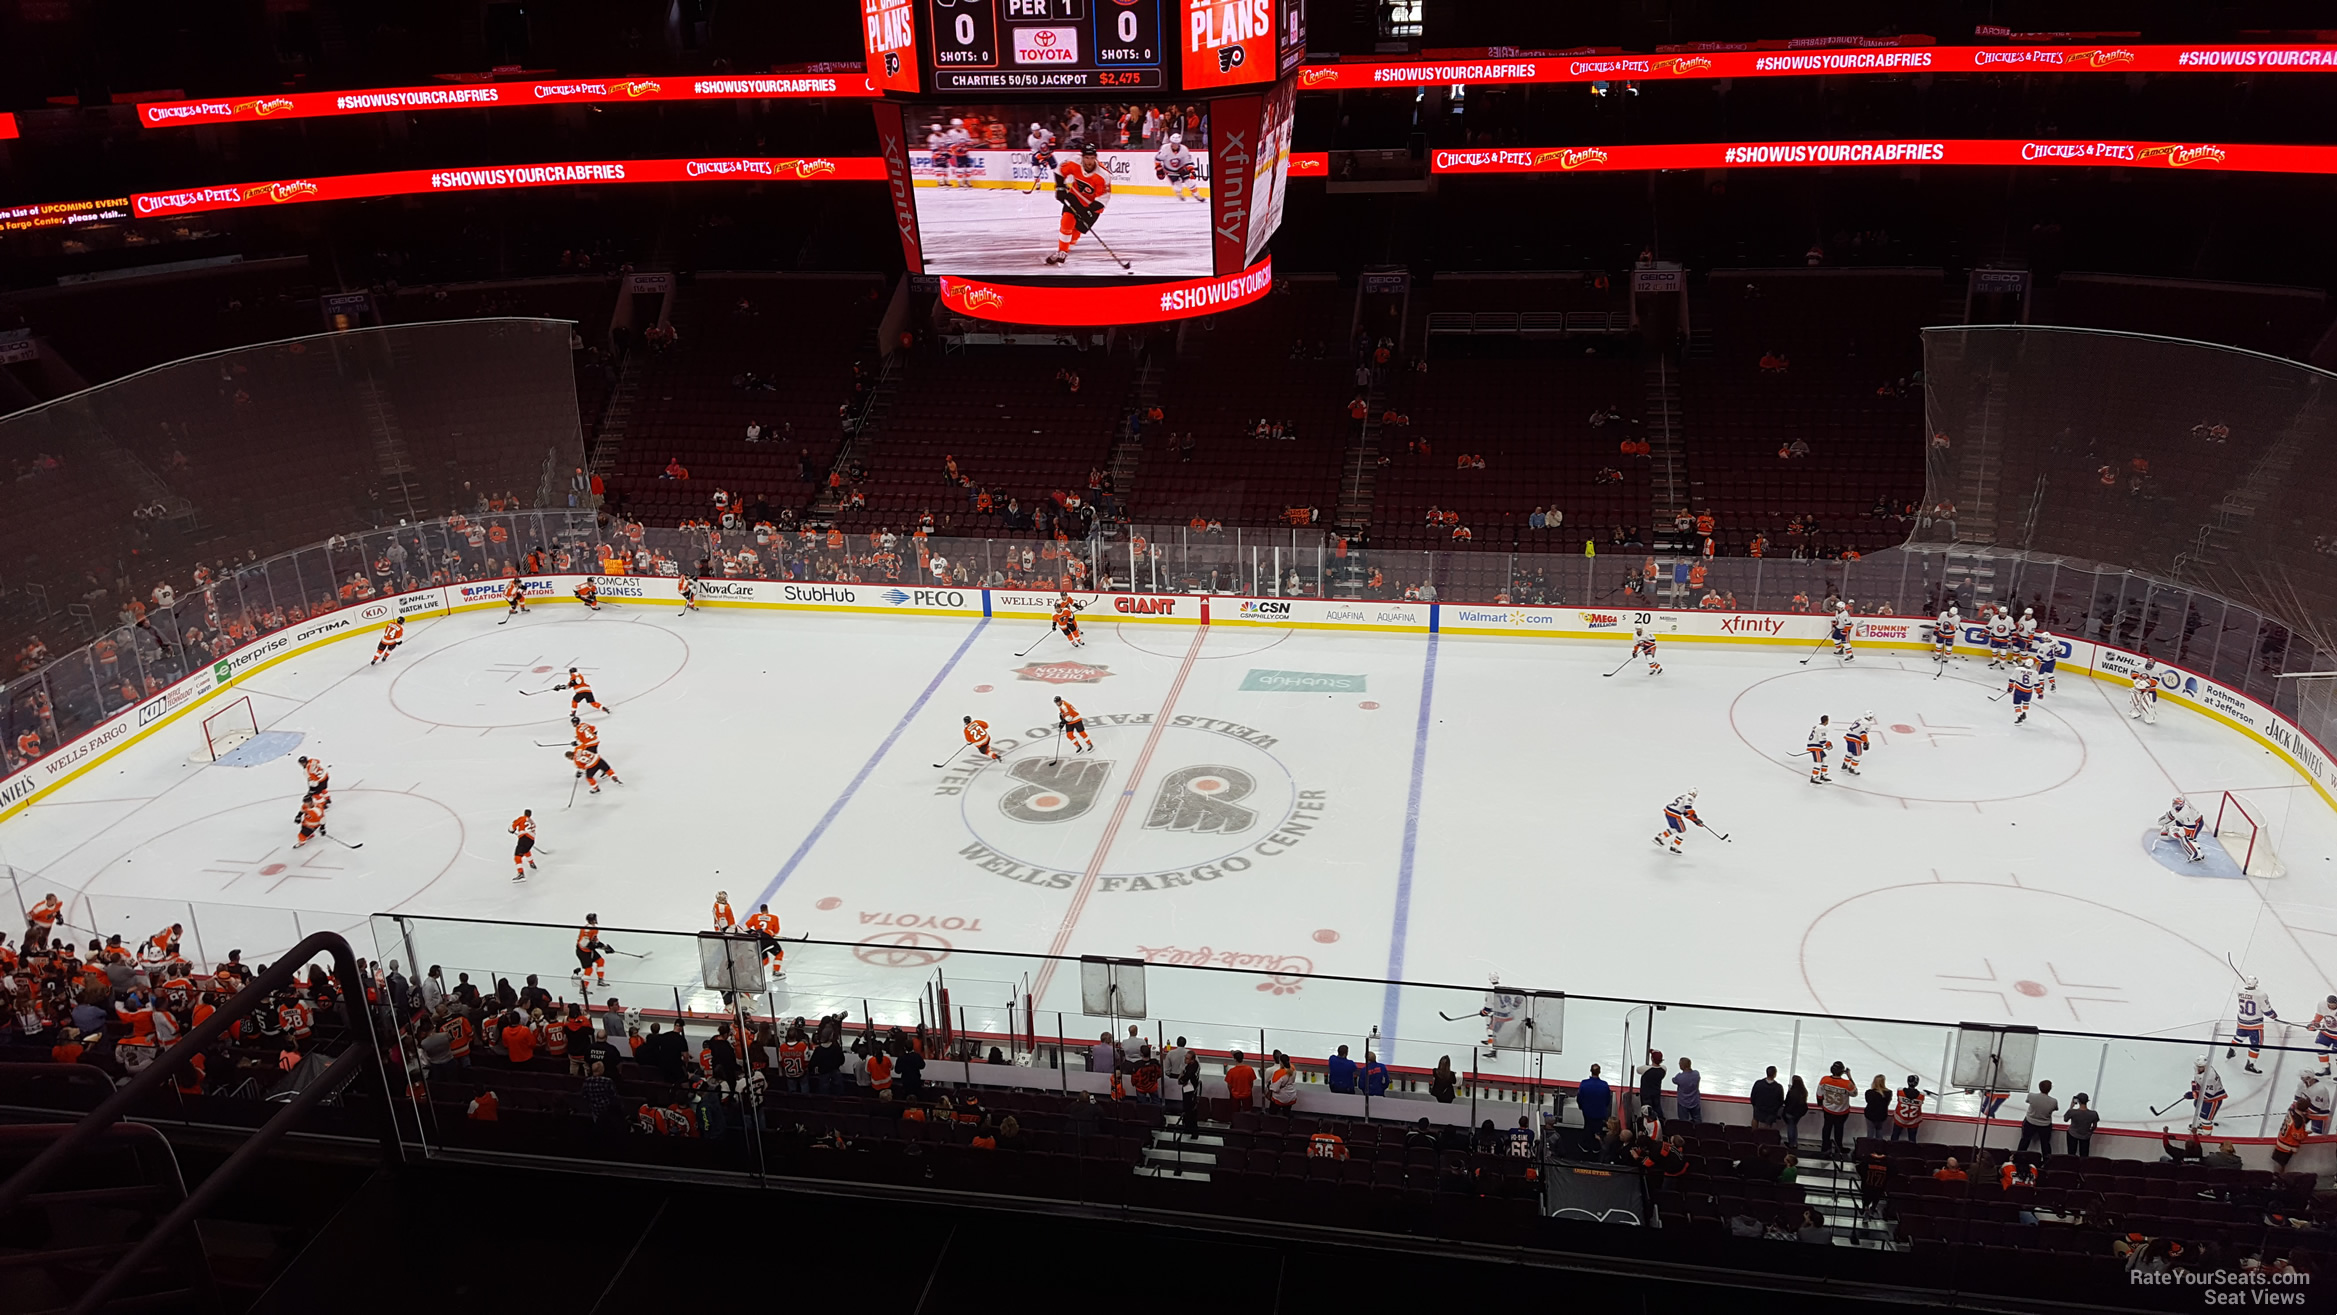 section 202, row 8 seat view  for hockey - wells fargo center